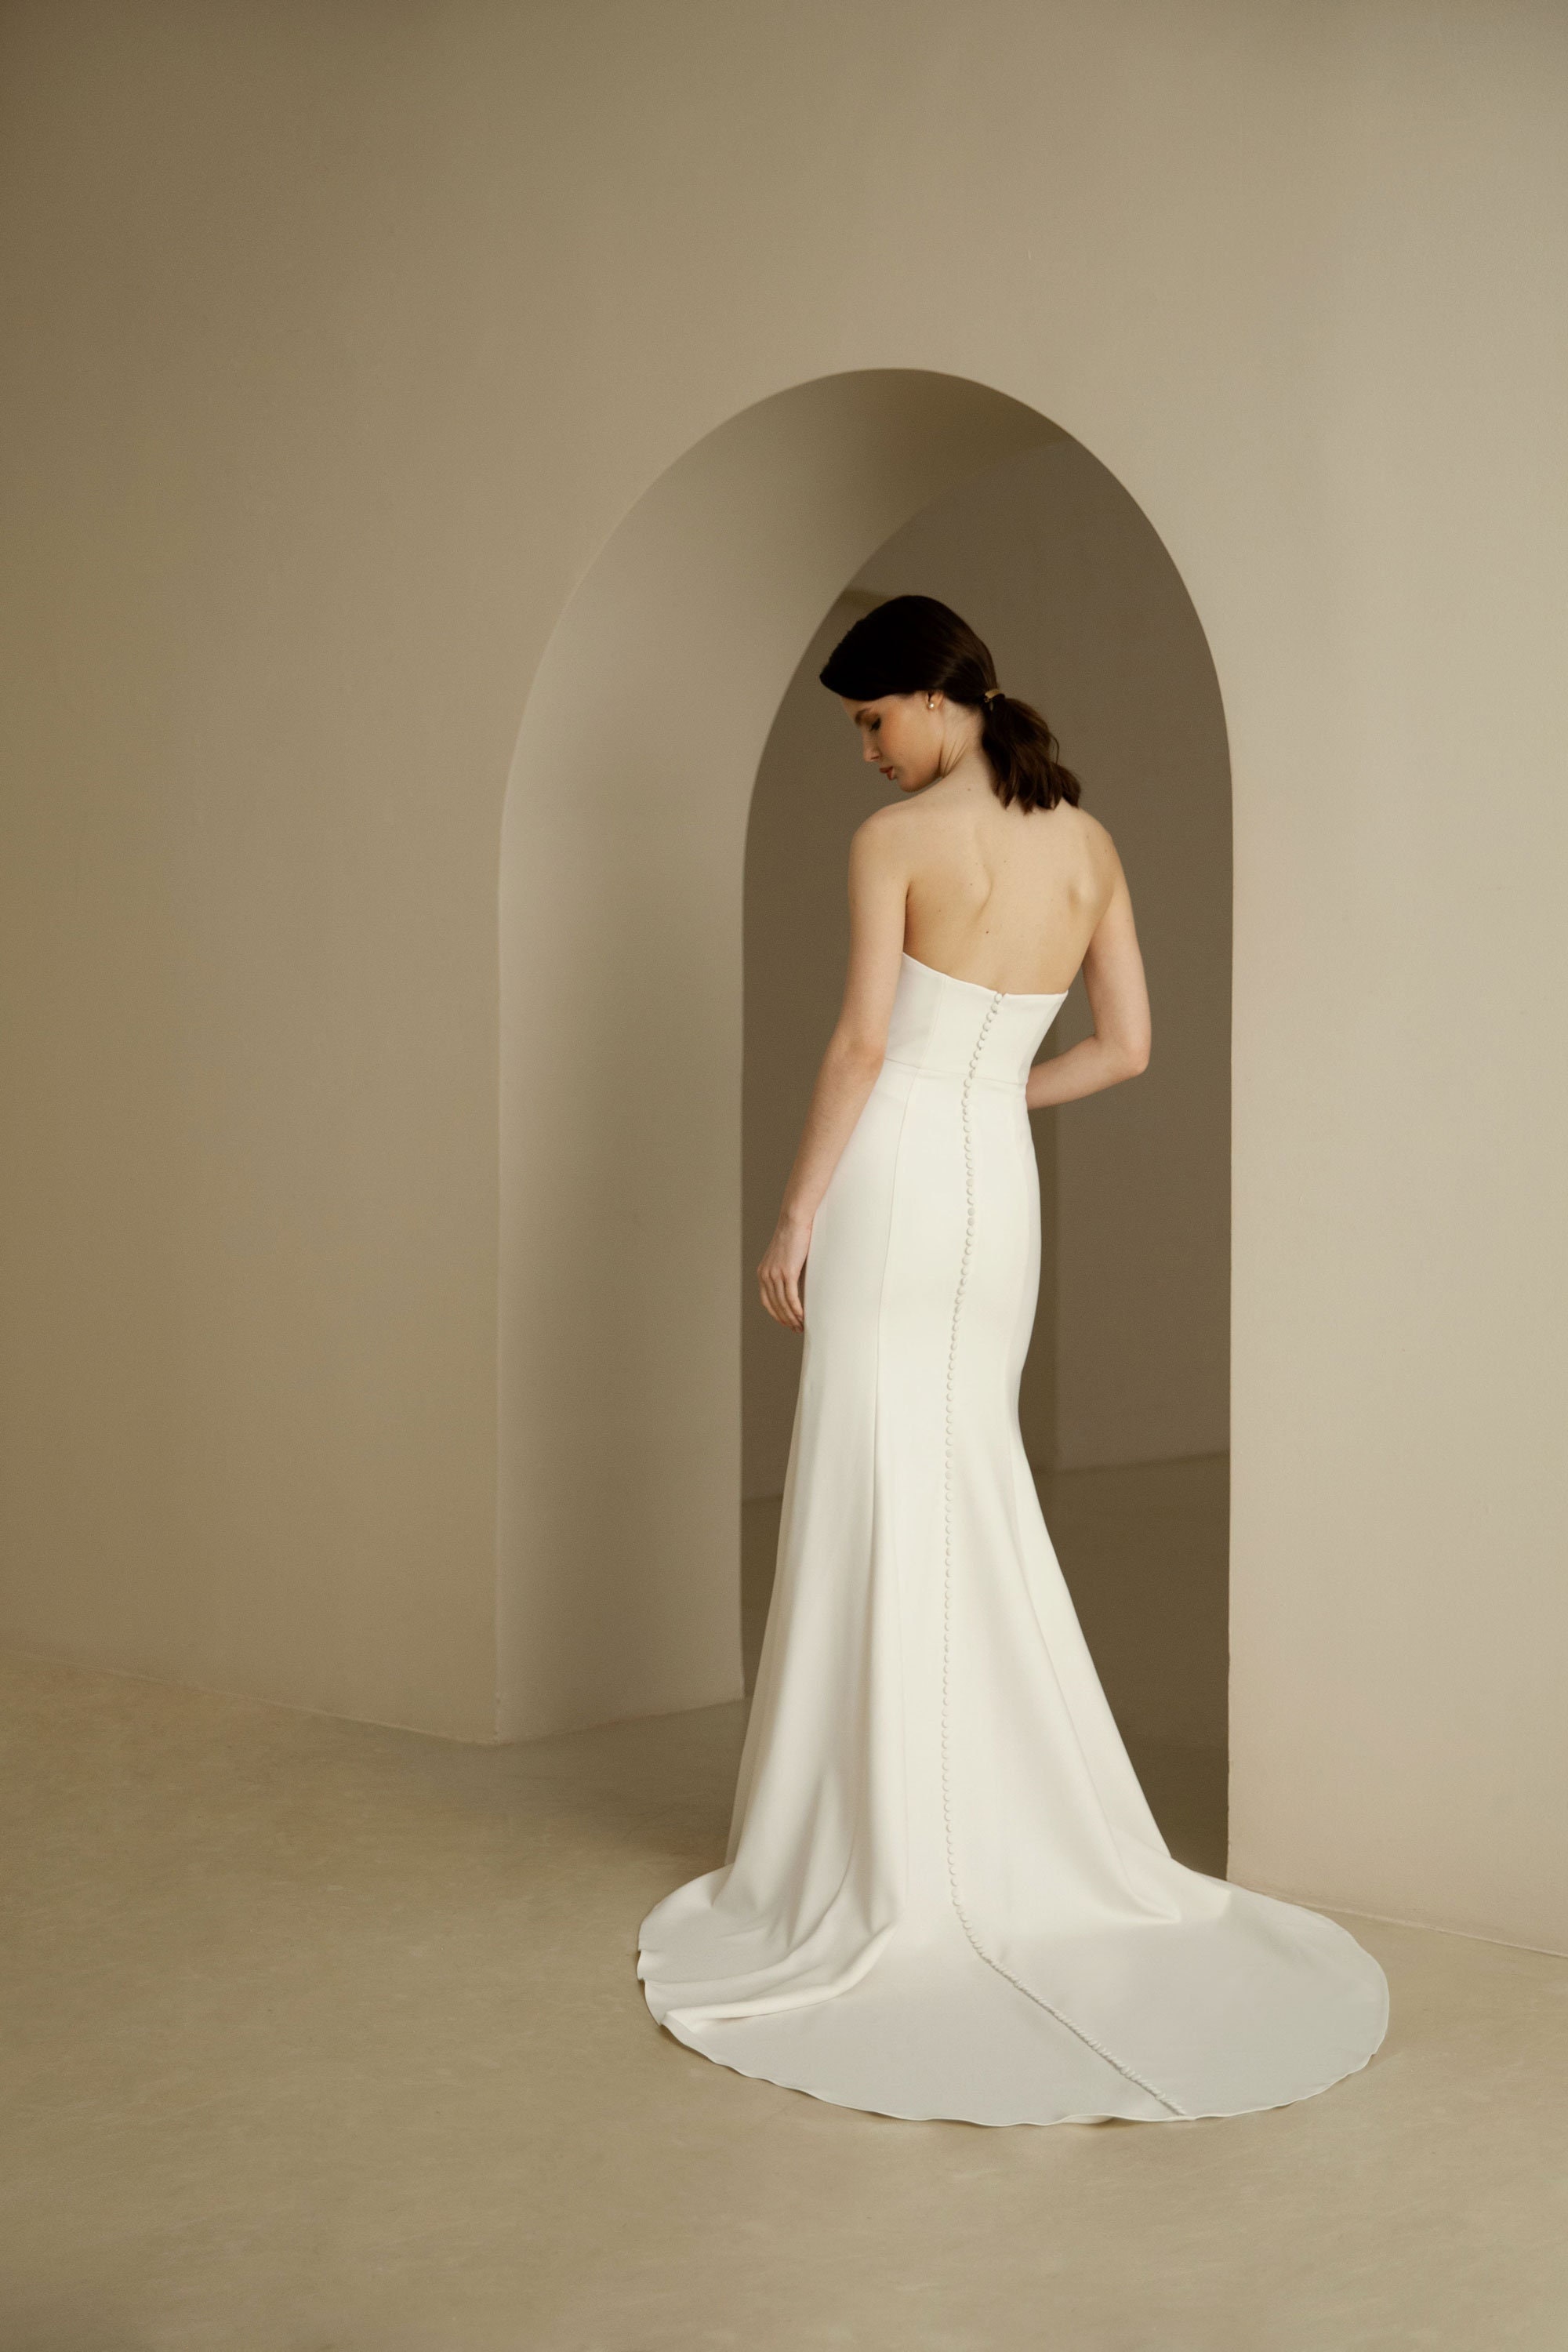 Minimalist Strapless Wedding Dress With Buttons Down the Back